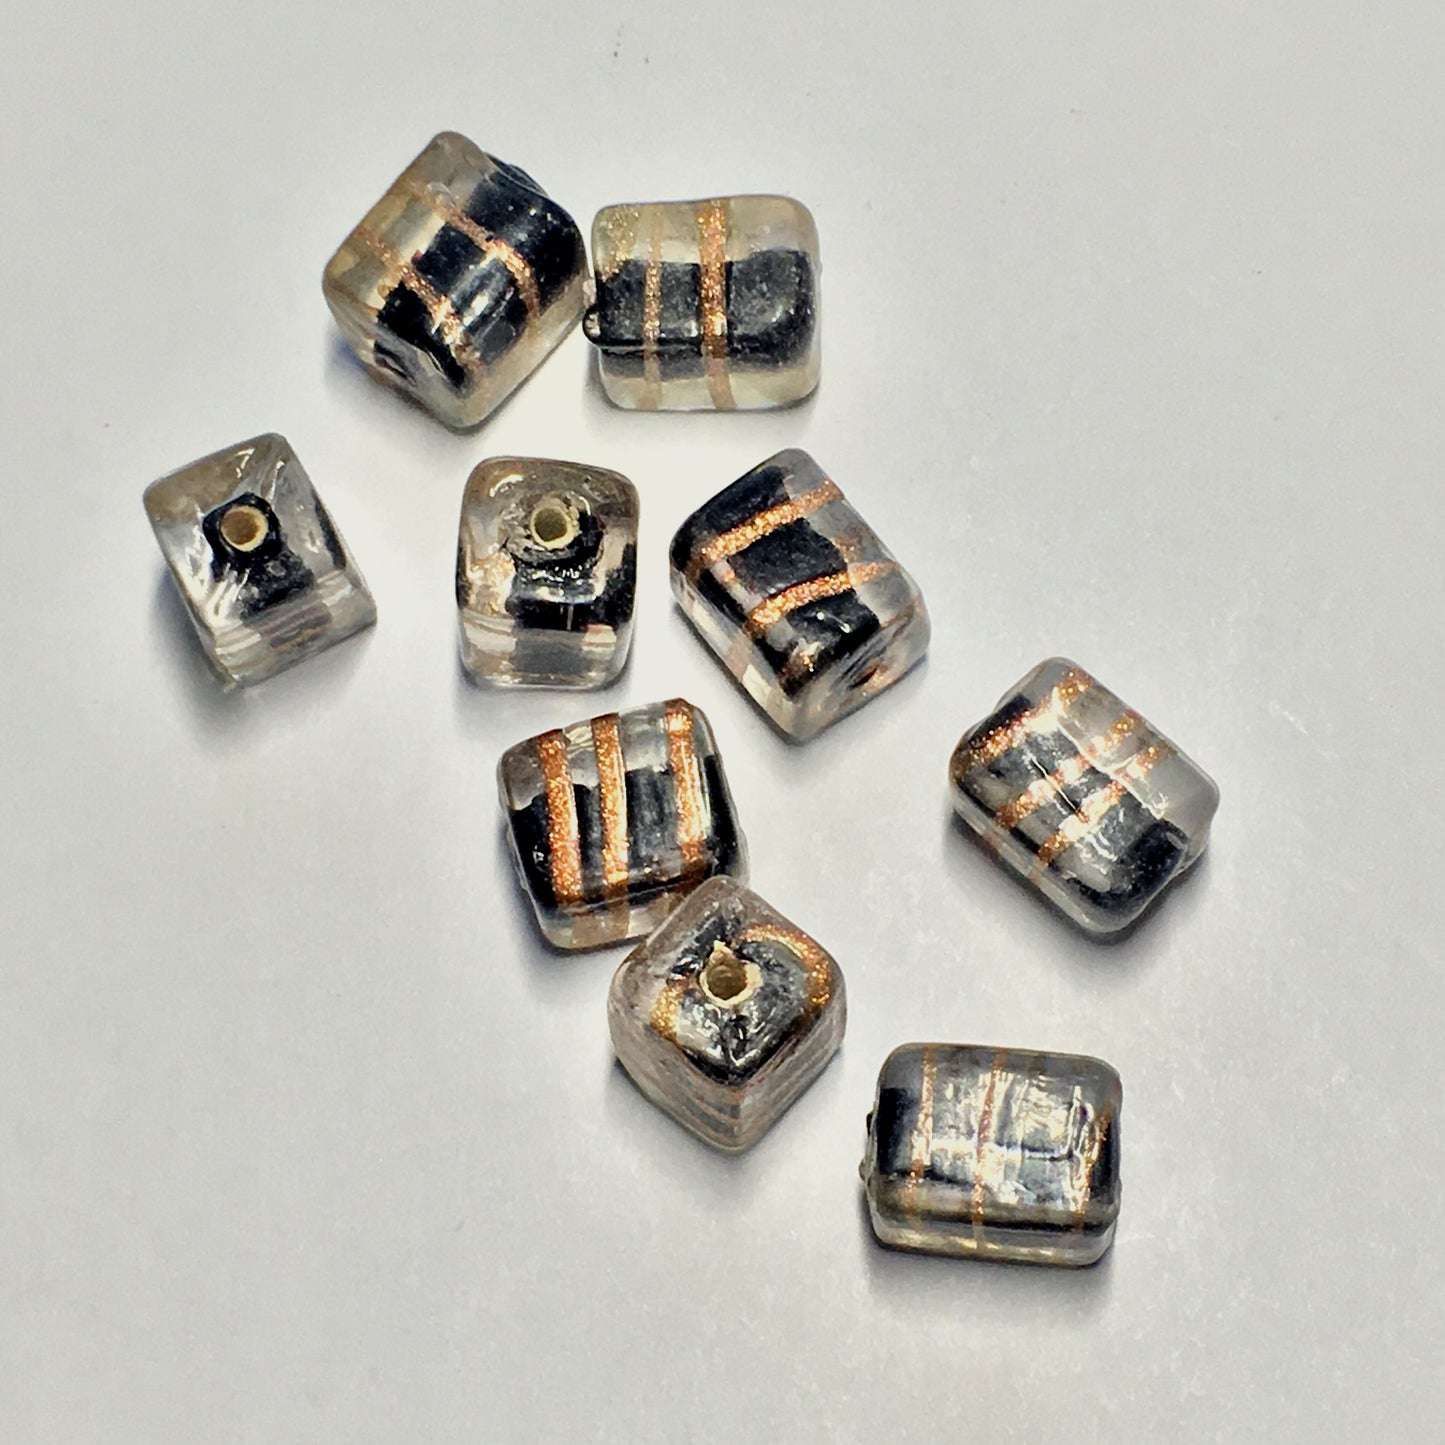 Clear Black Lined Glass Lampwork Rectangle Beads with Copper Foil Swirls, 11 x 8 mm, 9 Beads